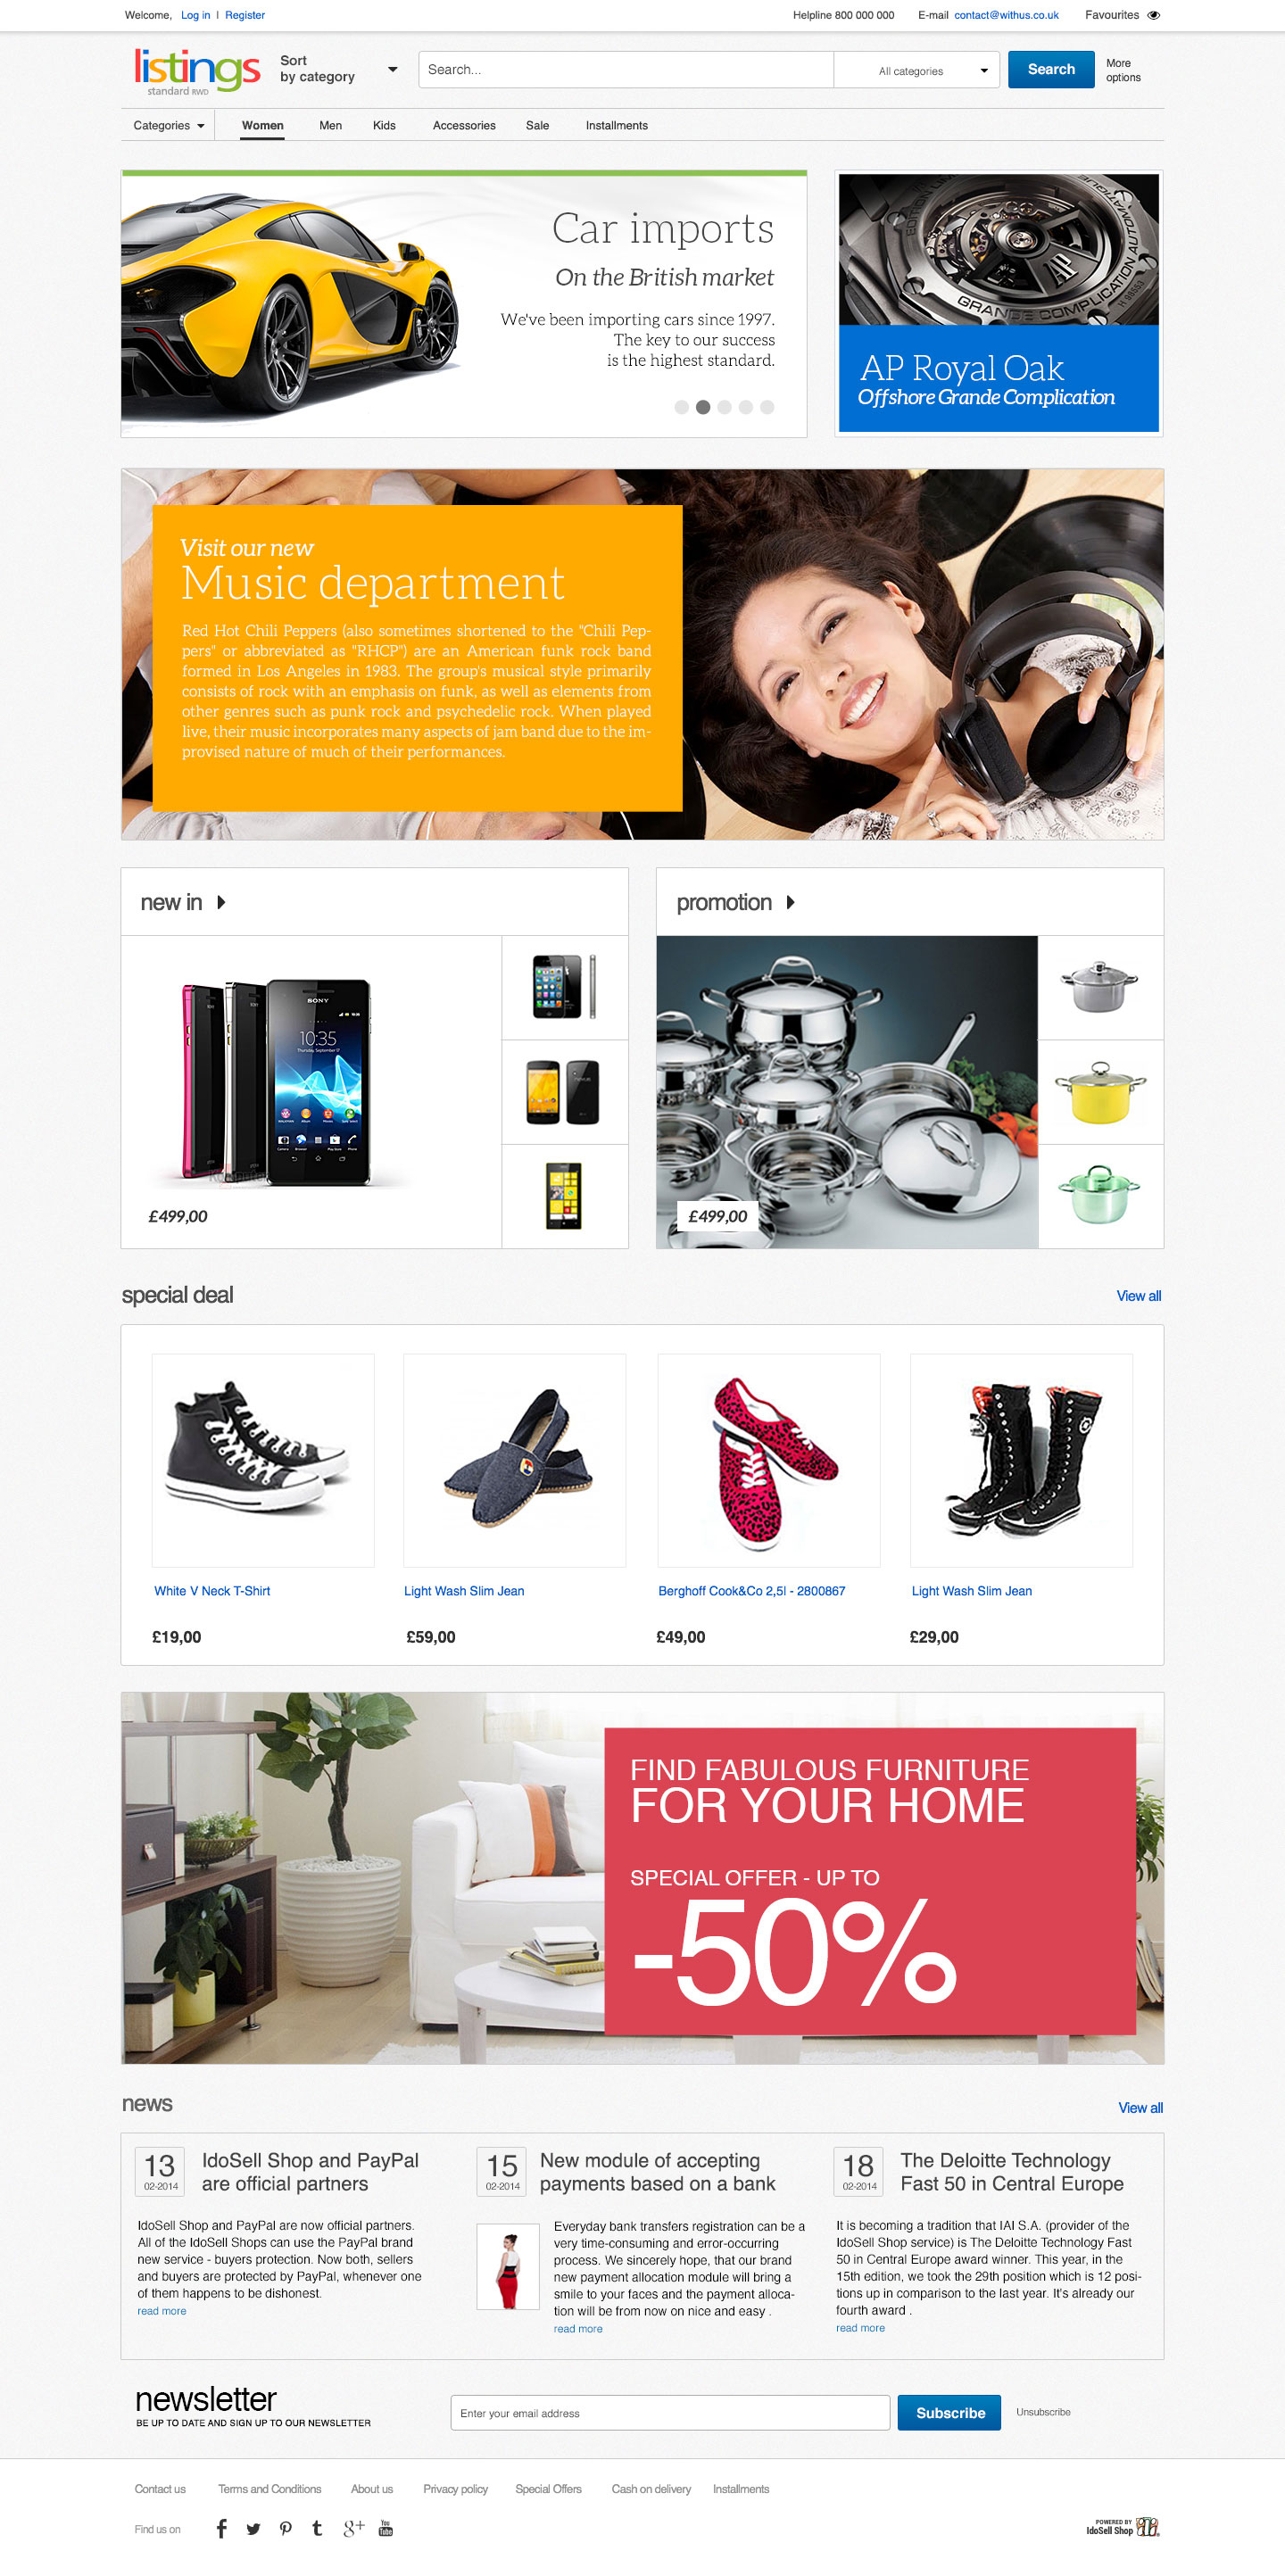 Shop Front For Ebay Auction Shops Ecommerce Tailored To Your Needs